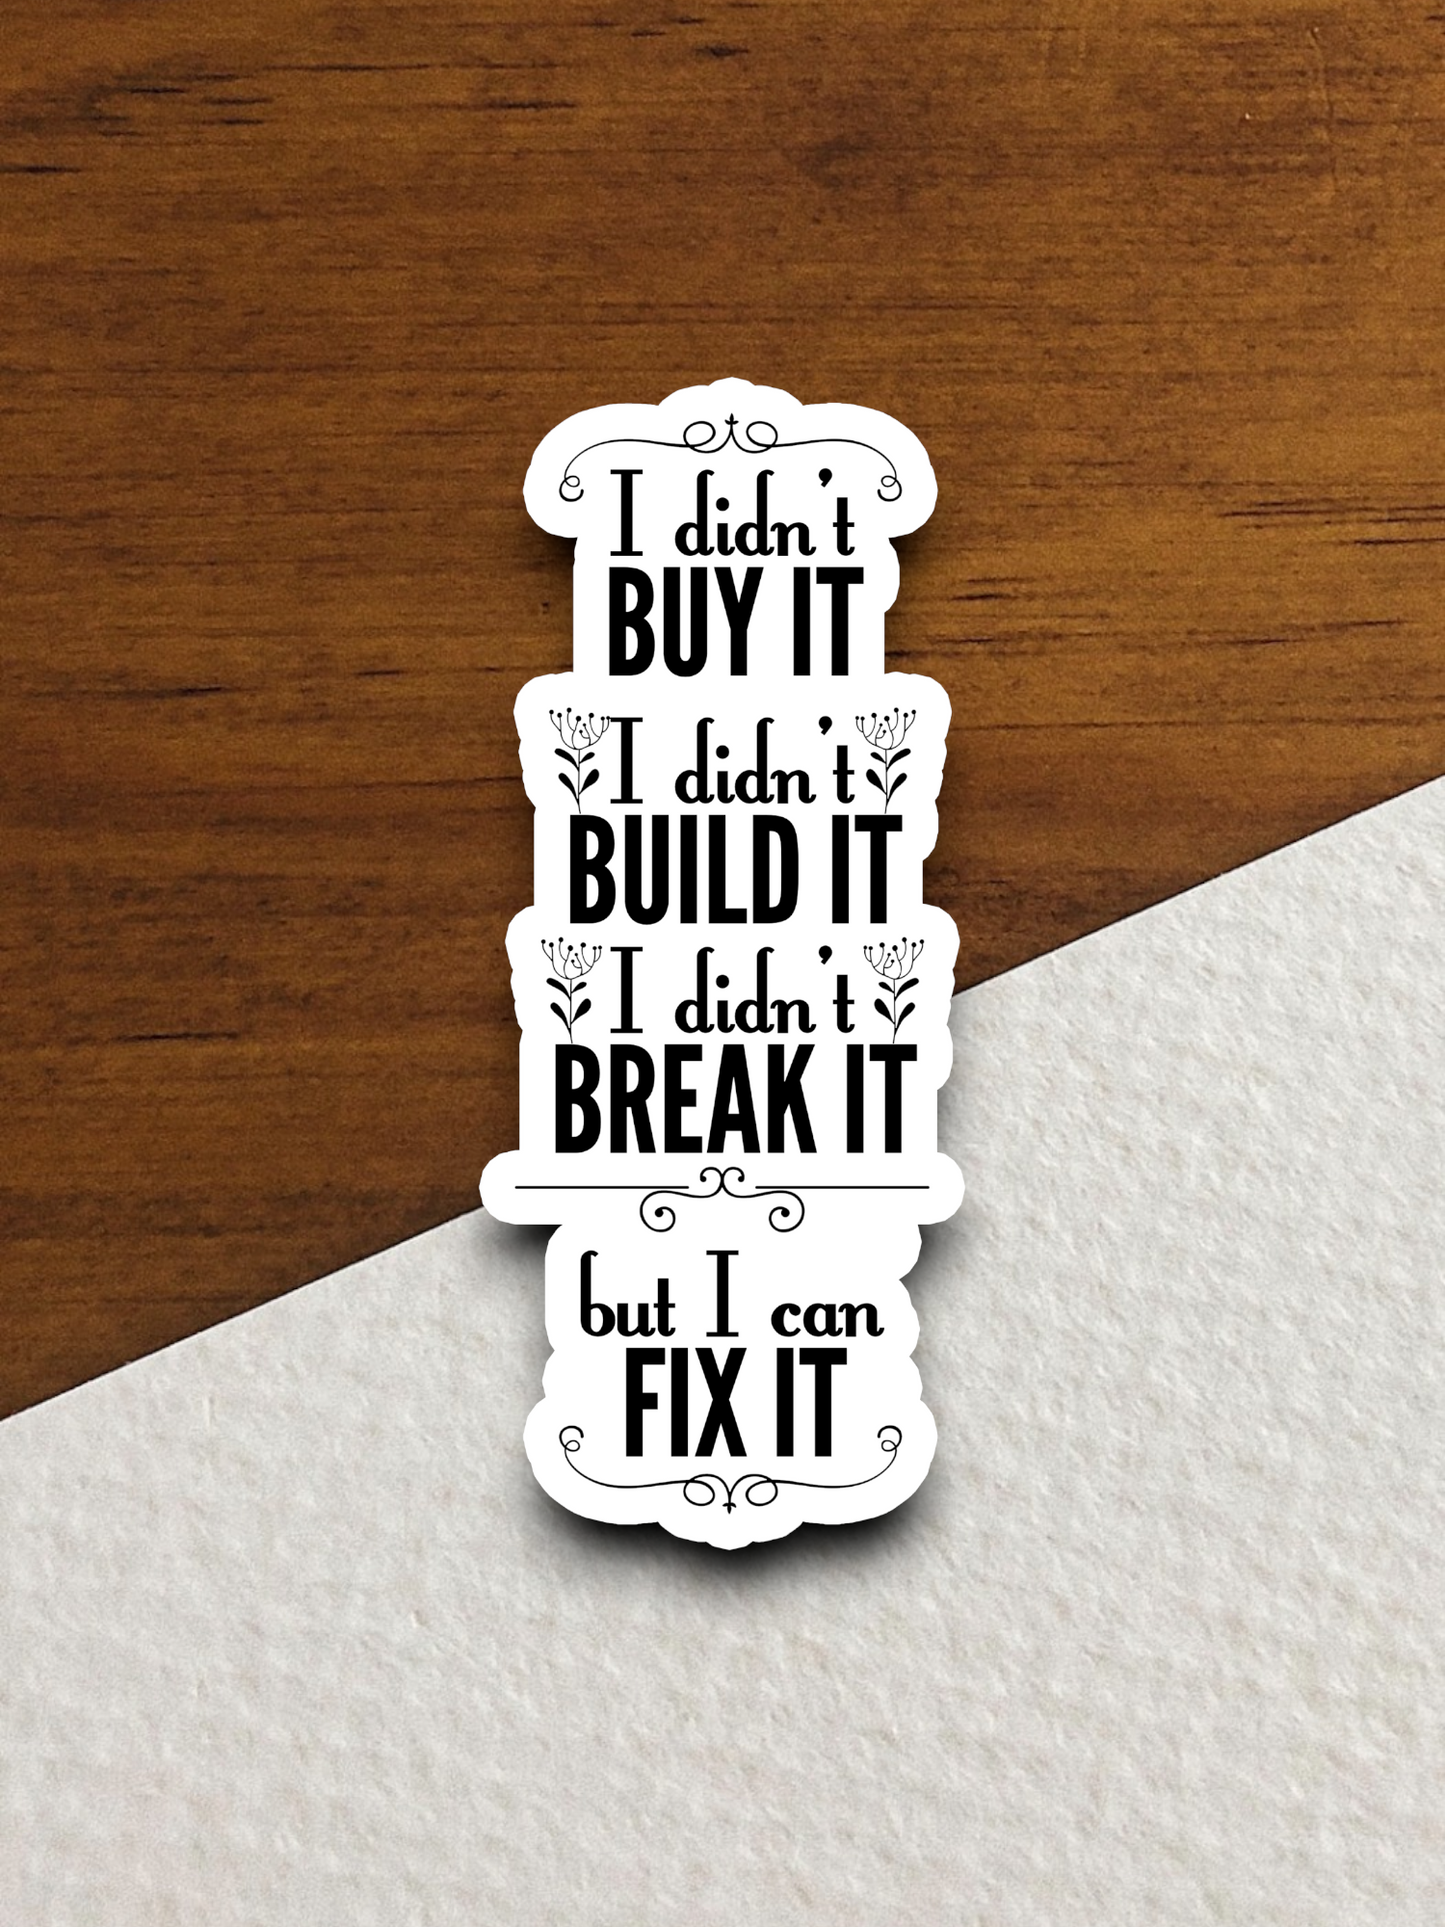 But I Can Fix It - Funny Work Sticker